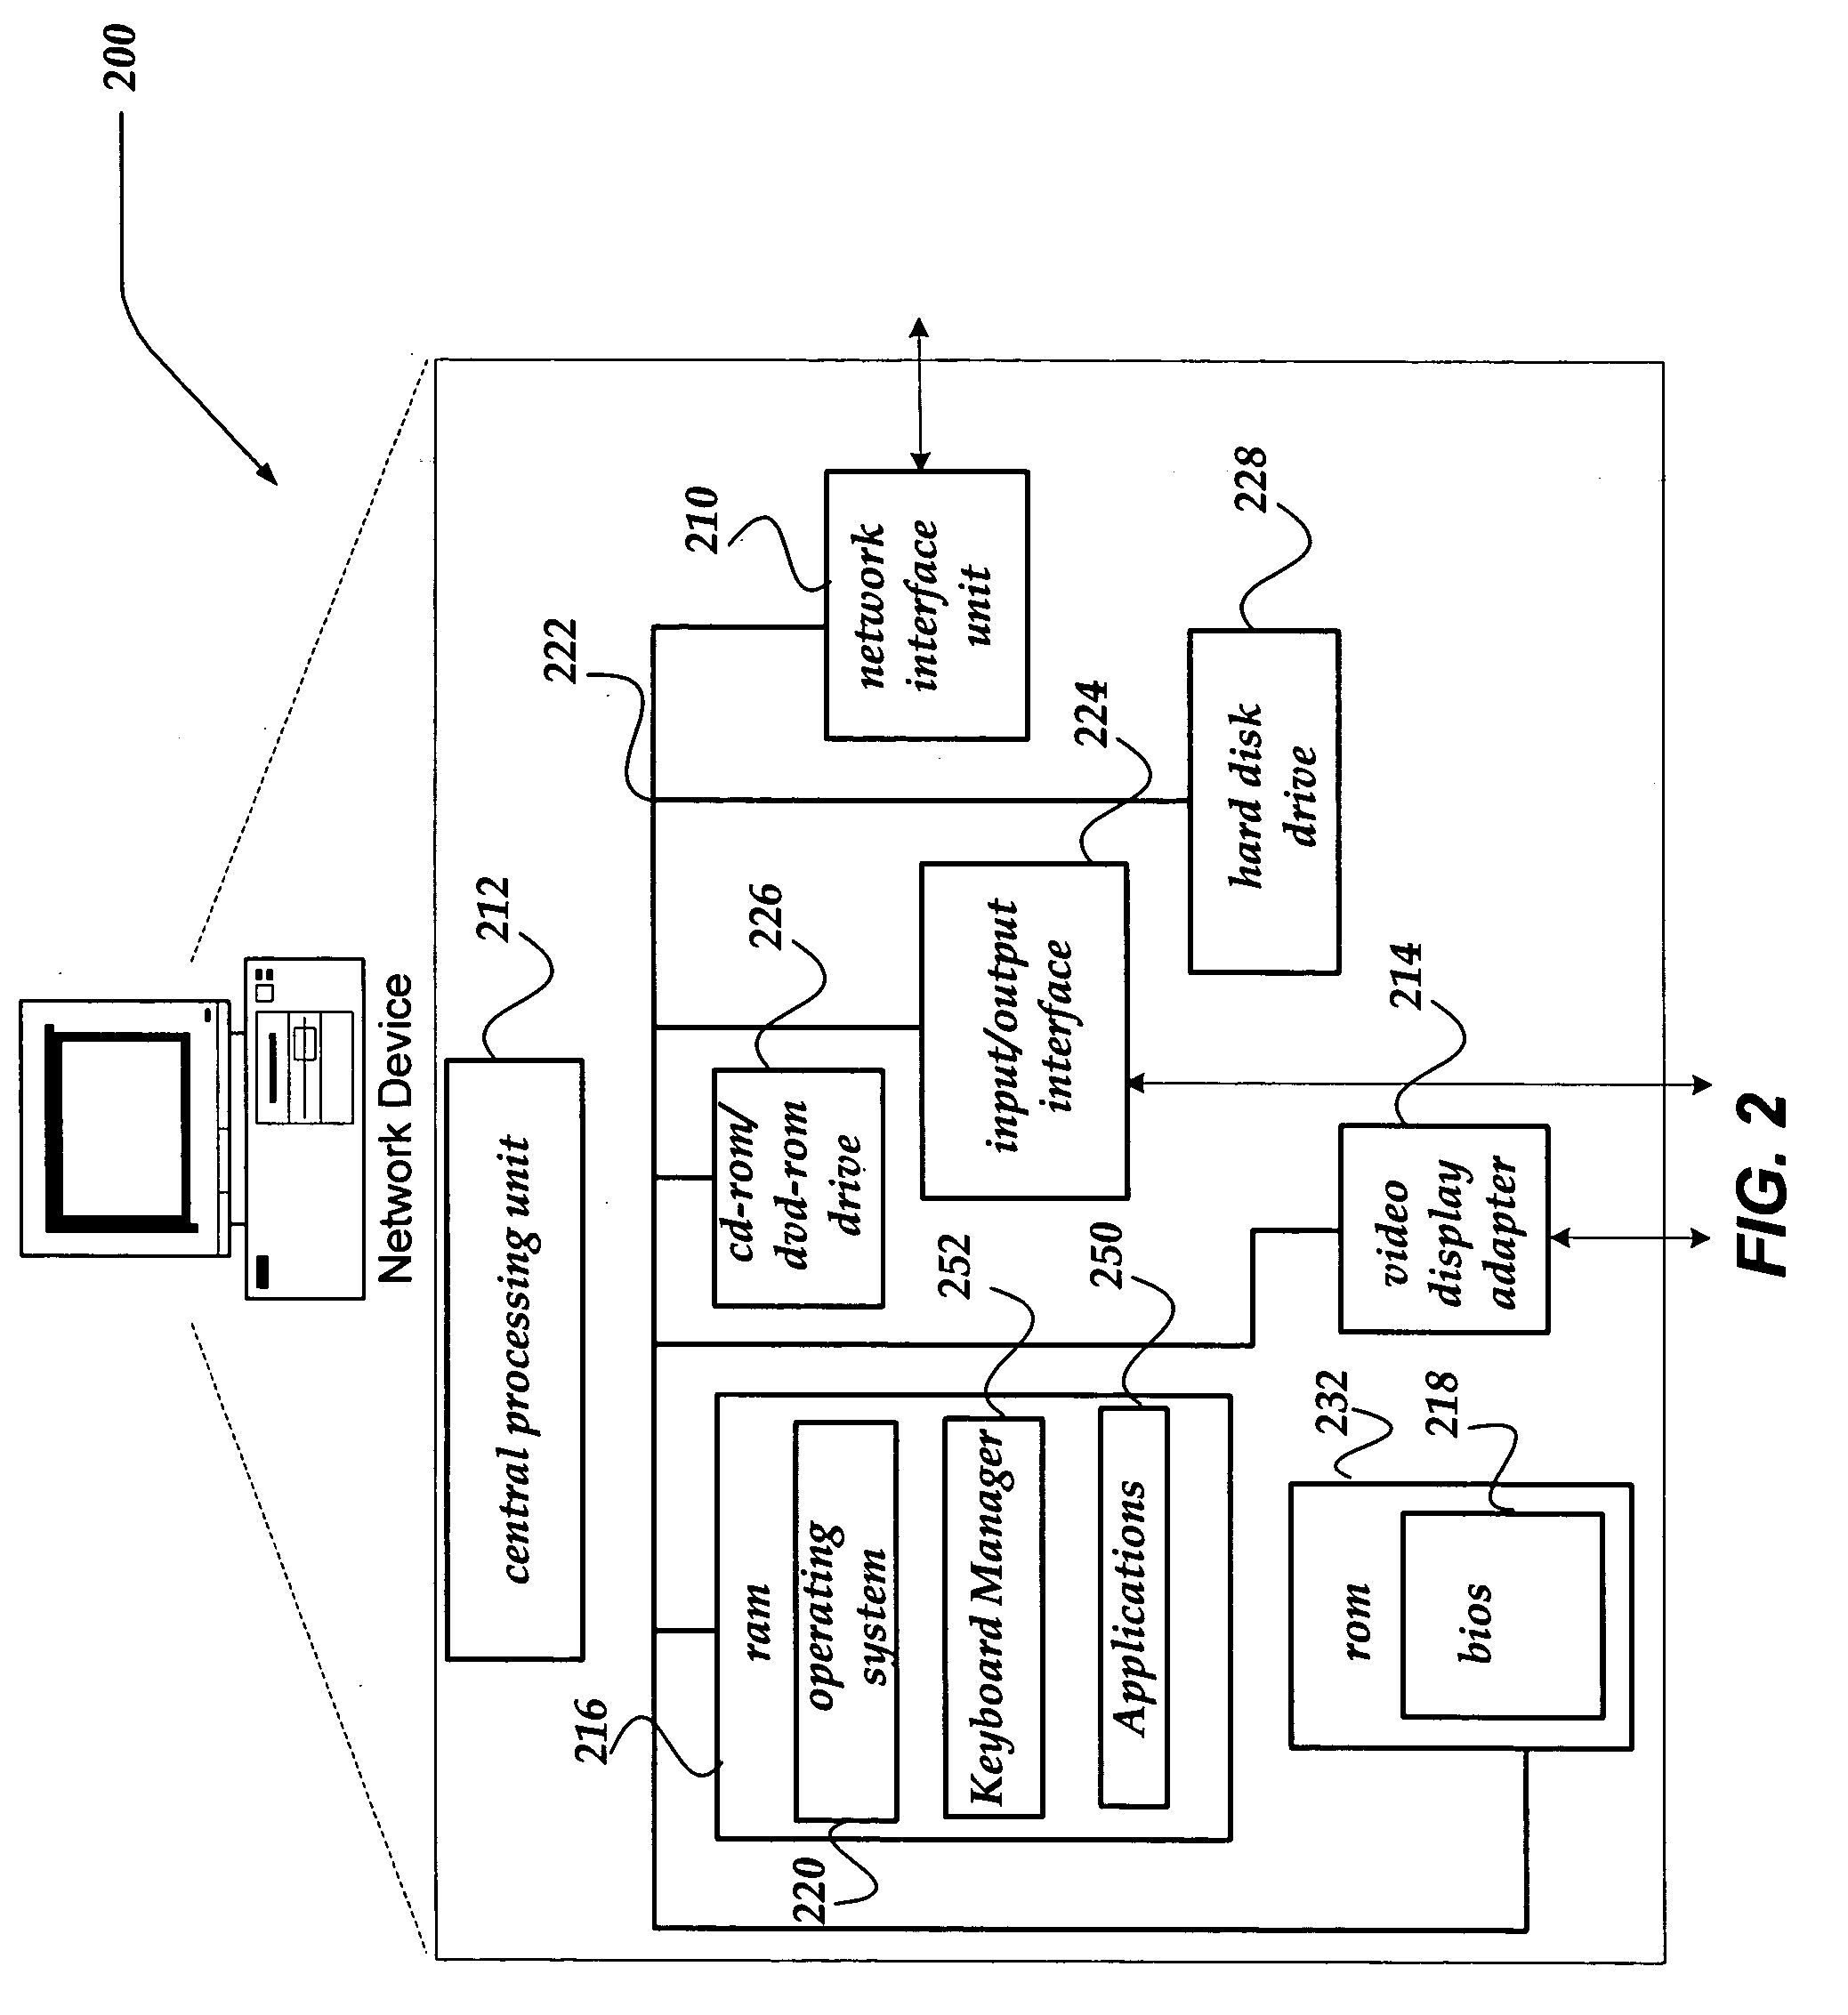 Method and apparatus for backlighting of a keyboard for use with a game device